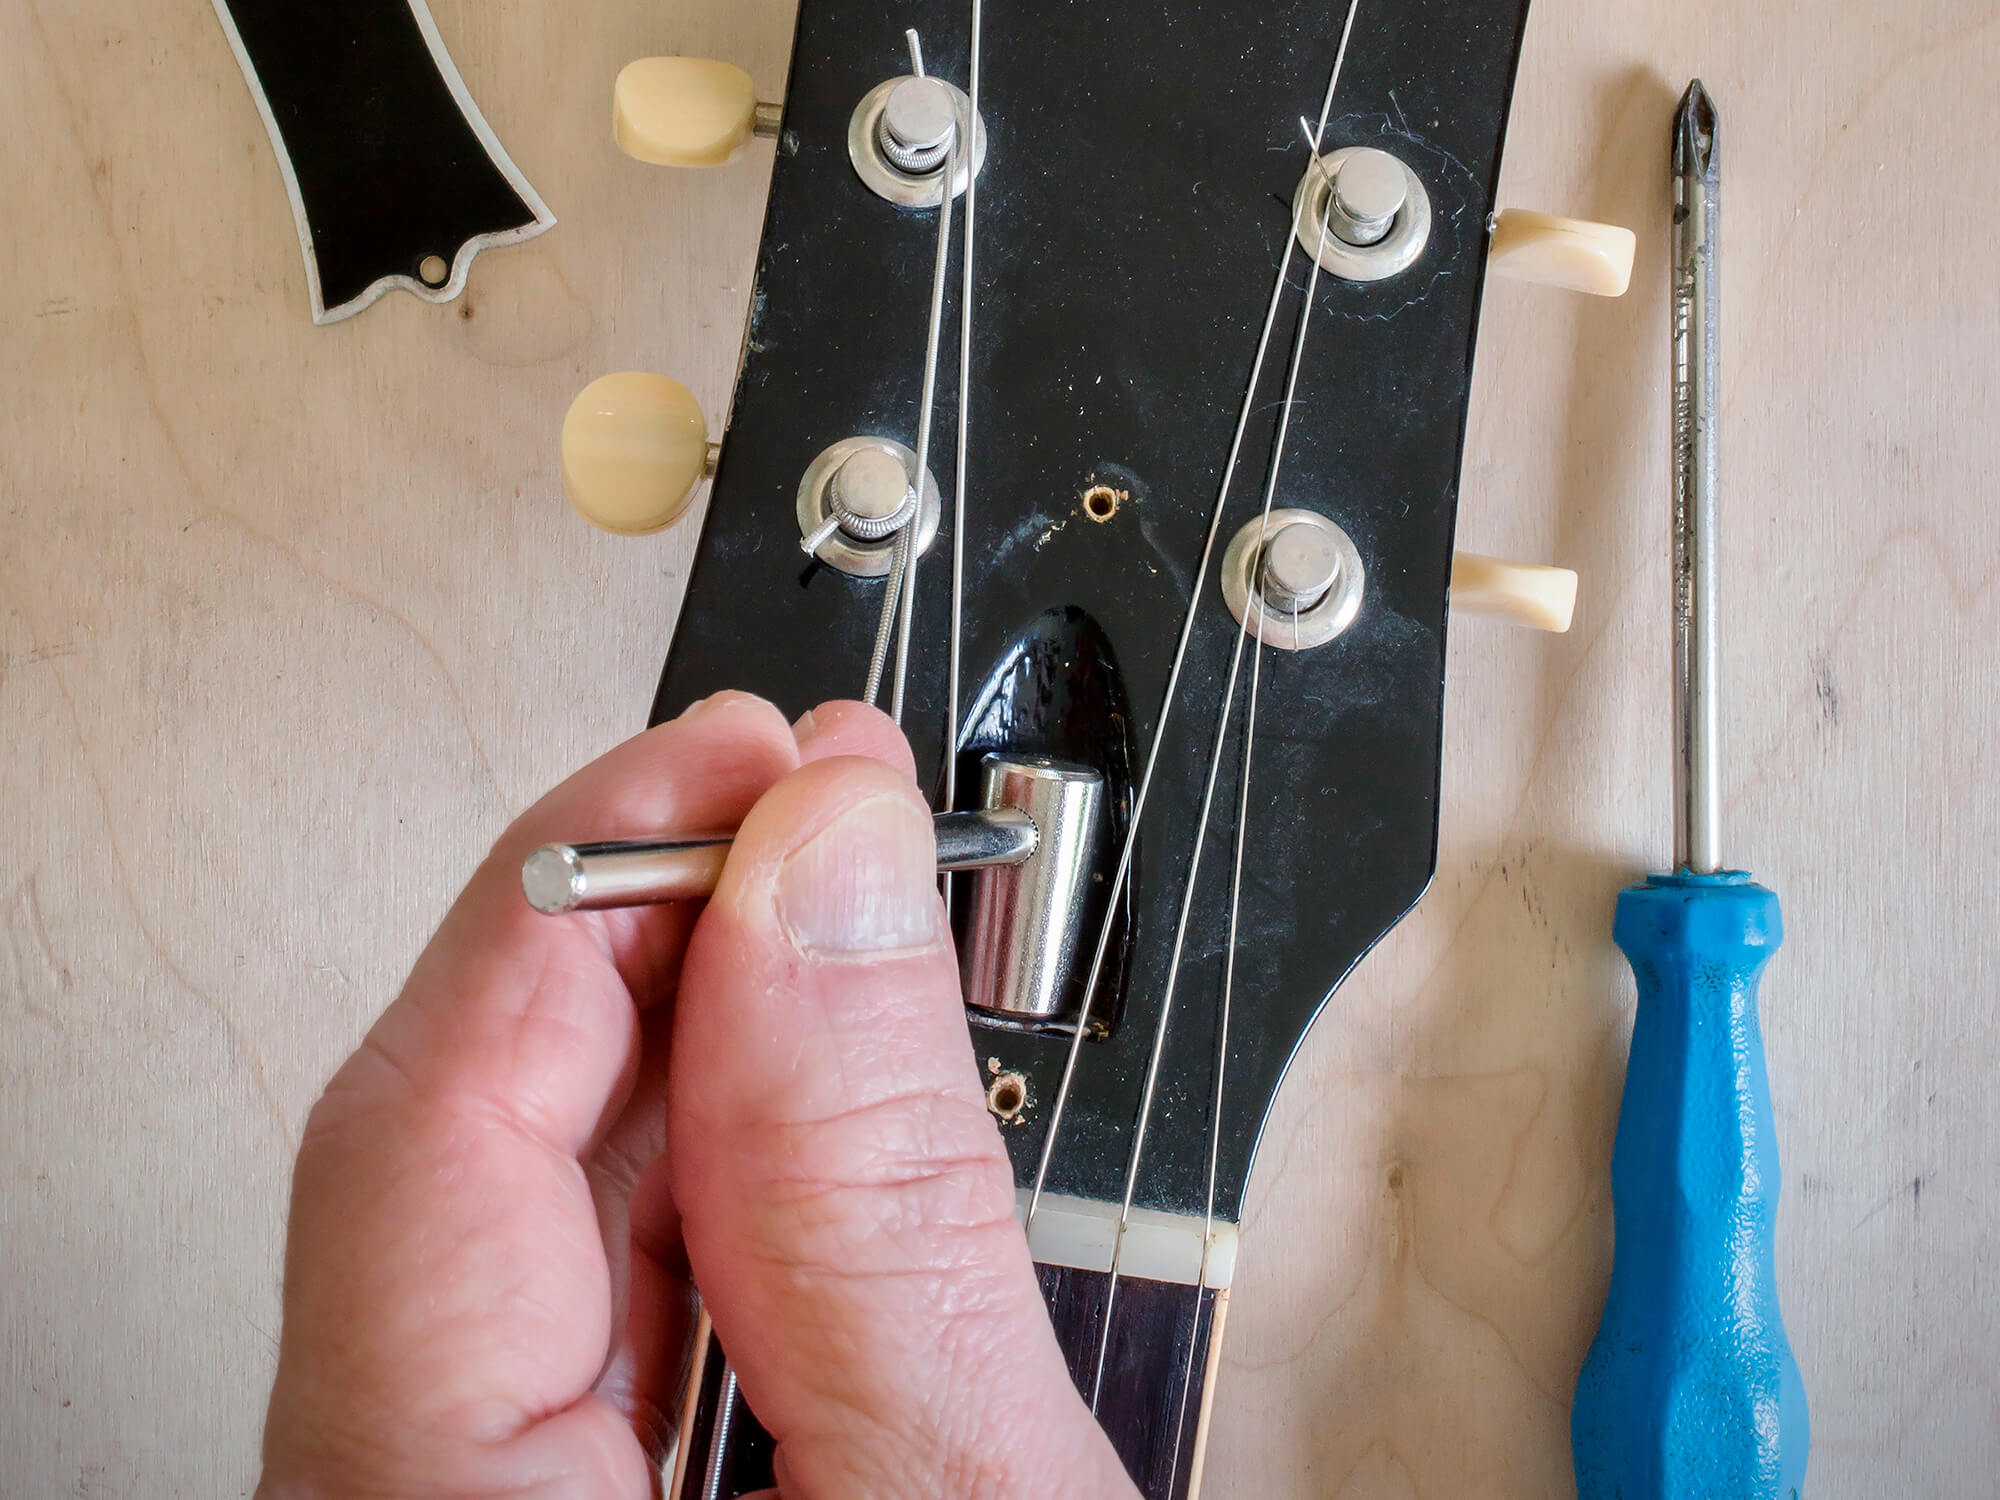 How To Adjust The Truss Rod On An Electric Guitar?